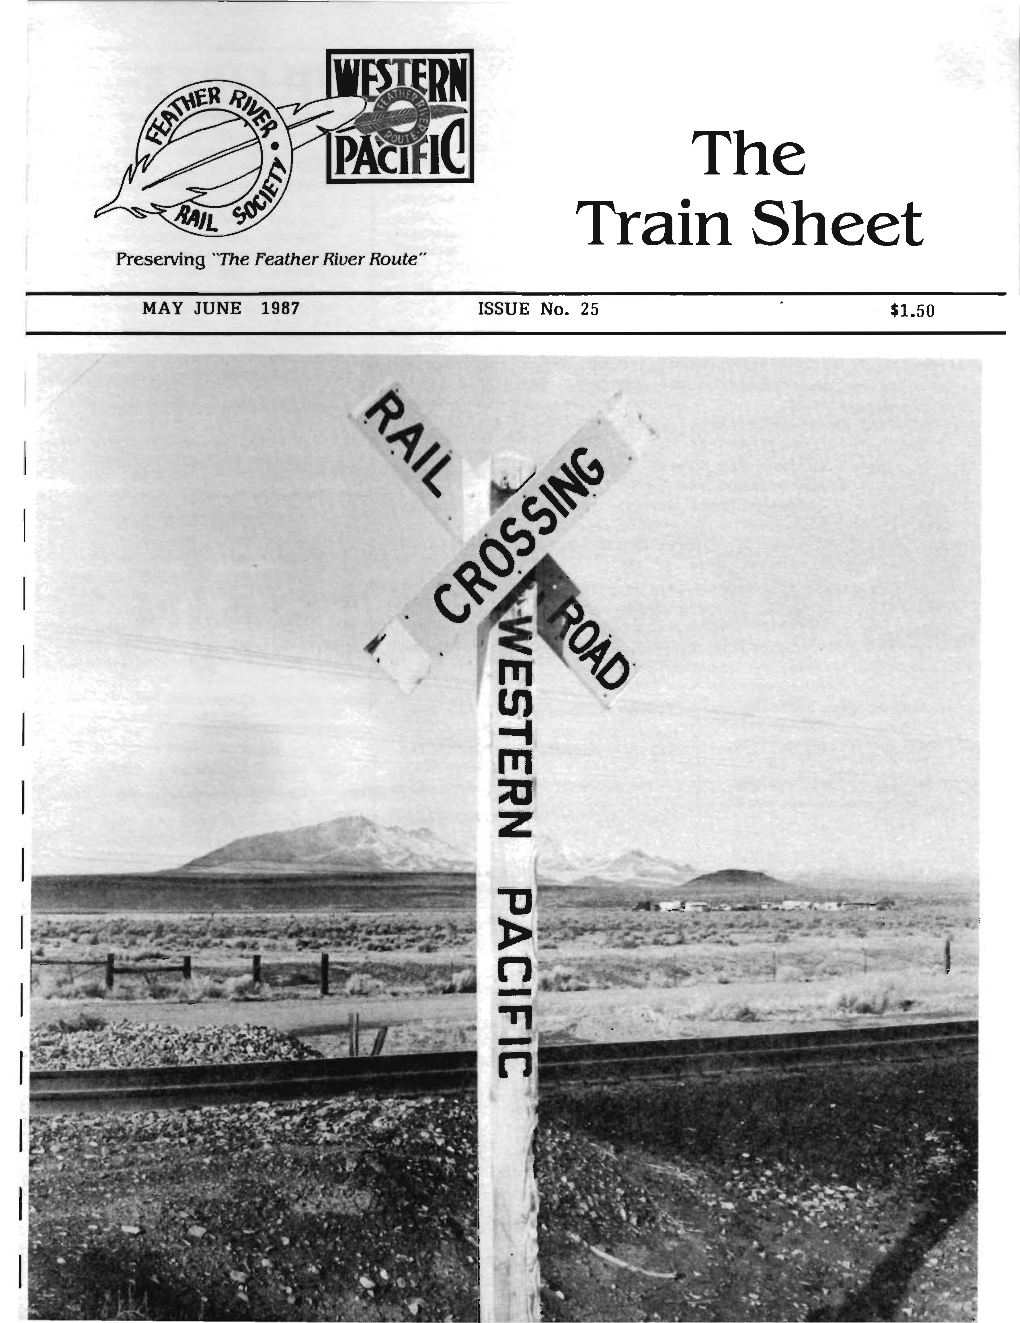 The Train Sheet Preserving 'The Feather River Route"